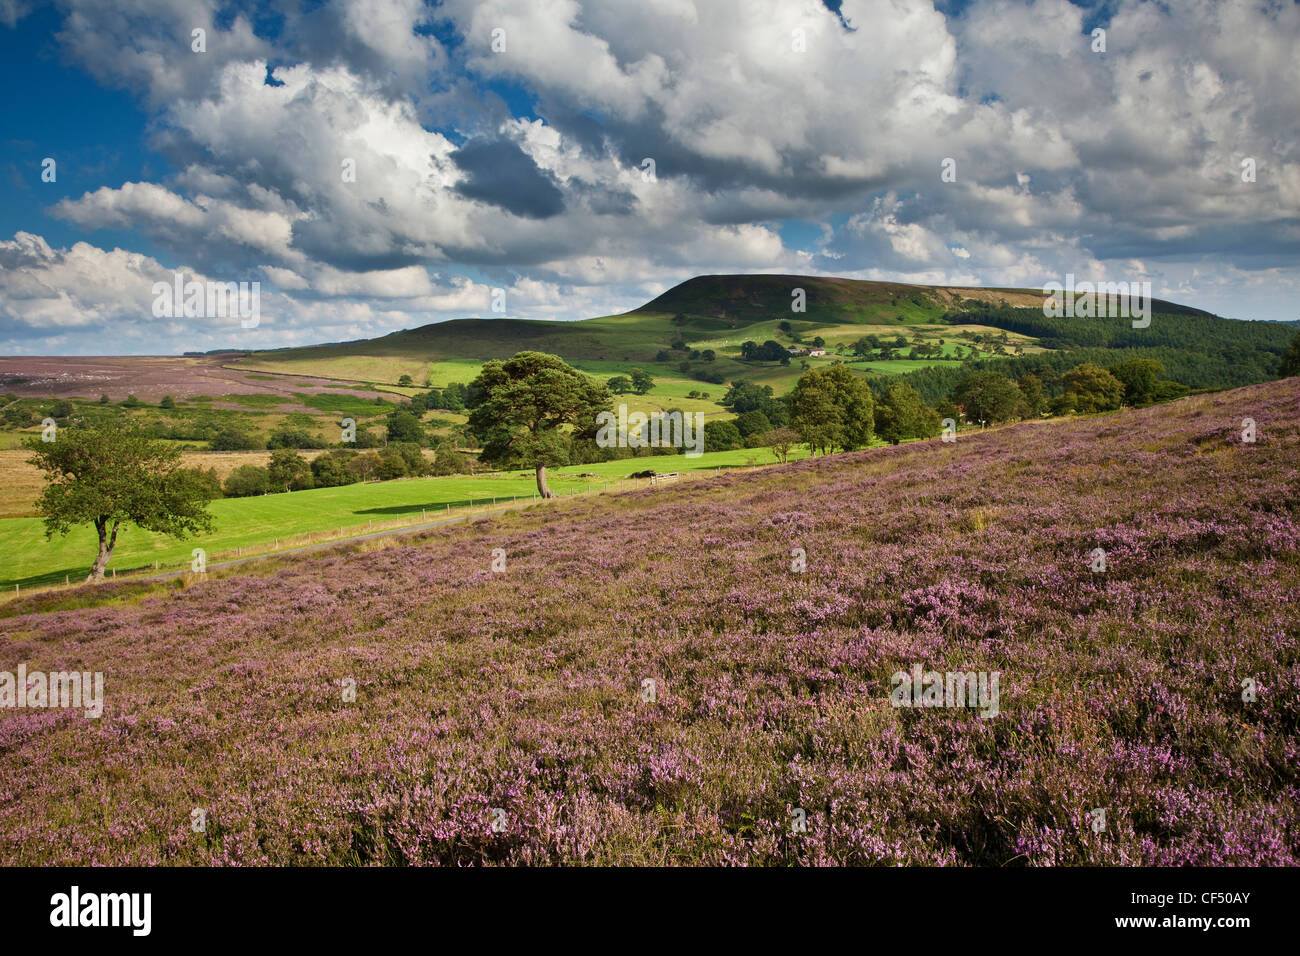 Blick über Heather in Richtung Easterside Hill in North York Moors National Park. Stockfoto